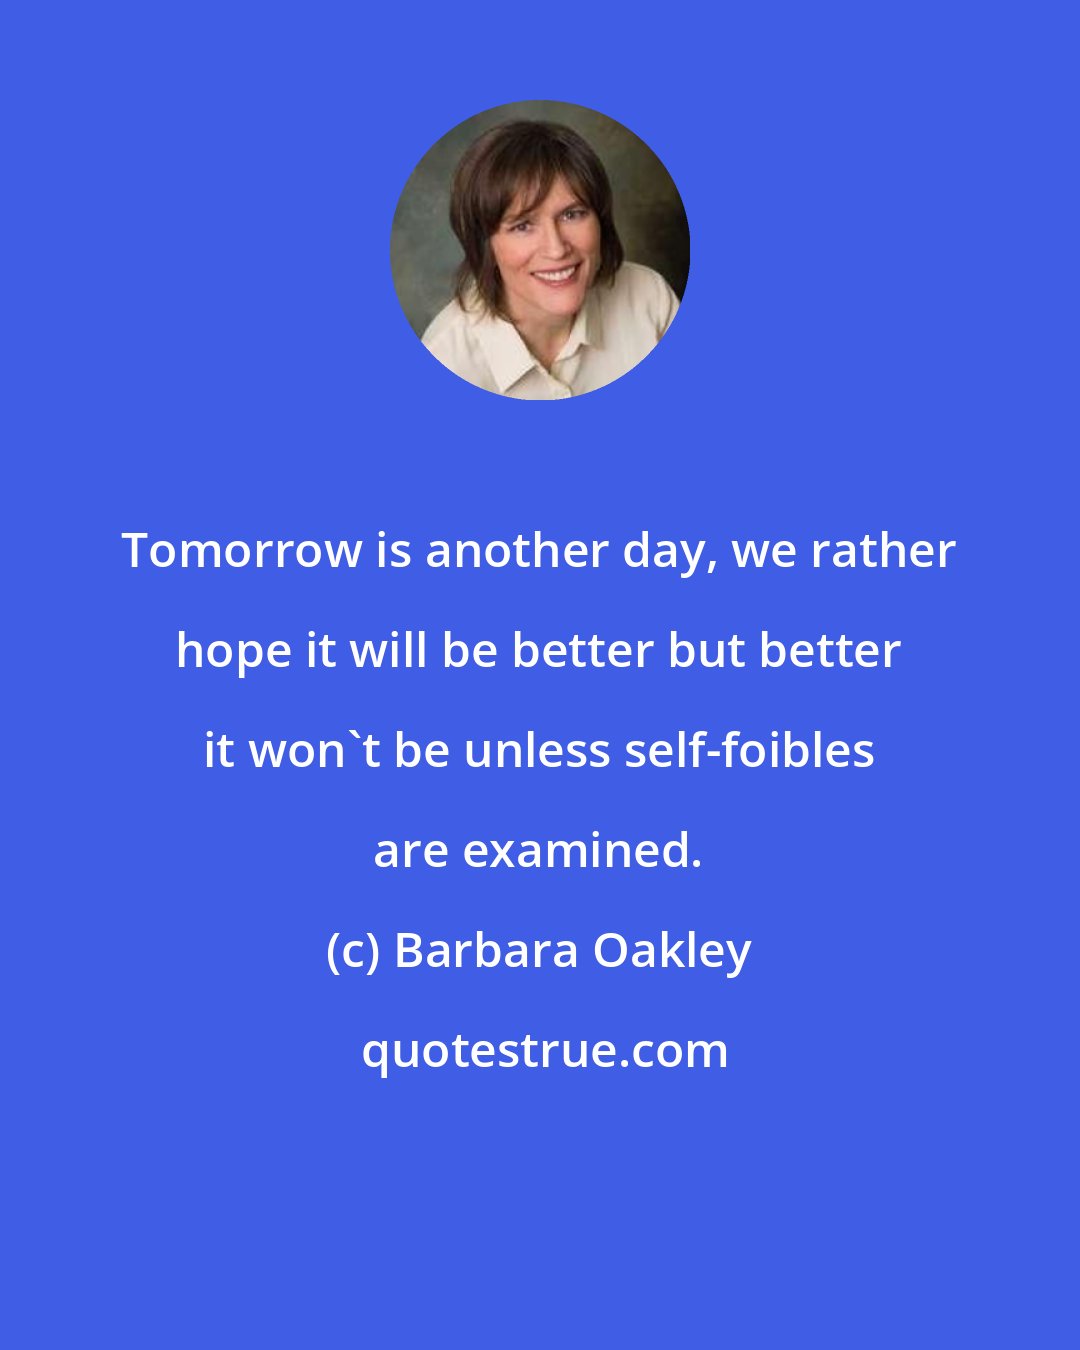 Barbara Oakley: Tomorrow is another day, we rather hope it will be better but better it won't be unless self-foibles are examined.